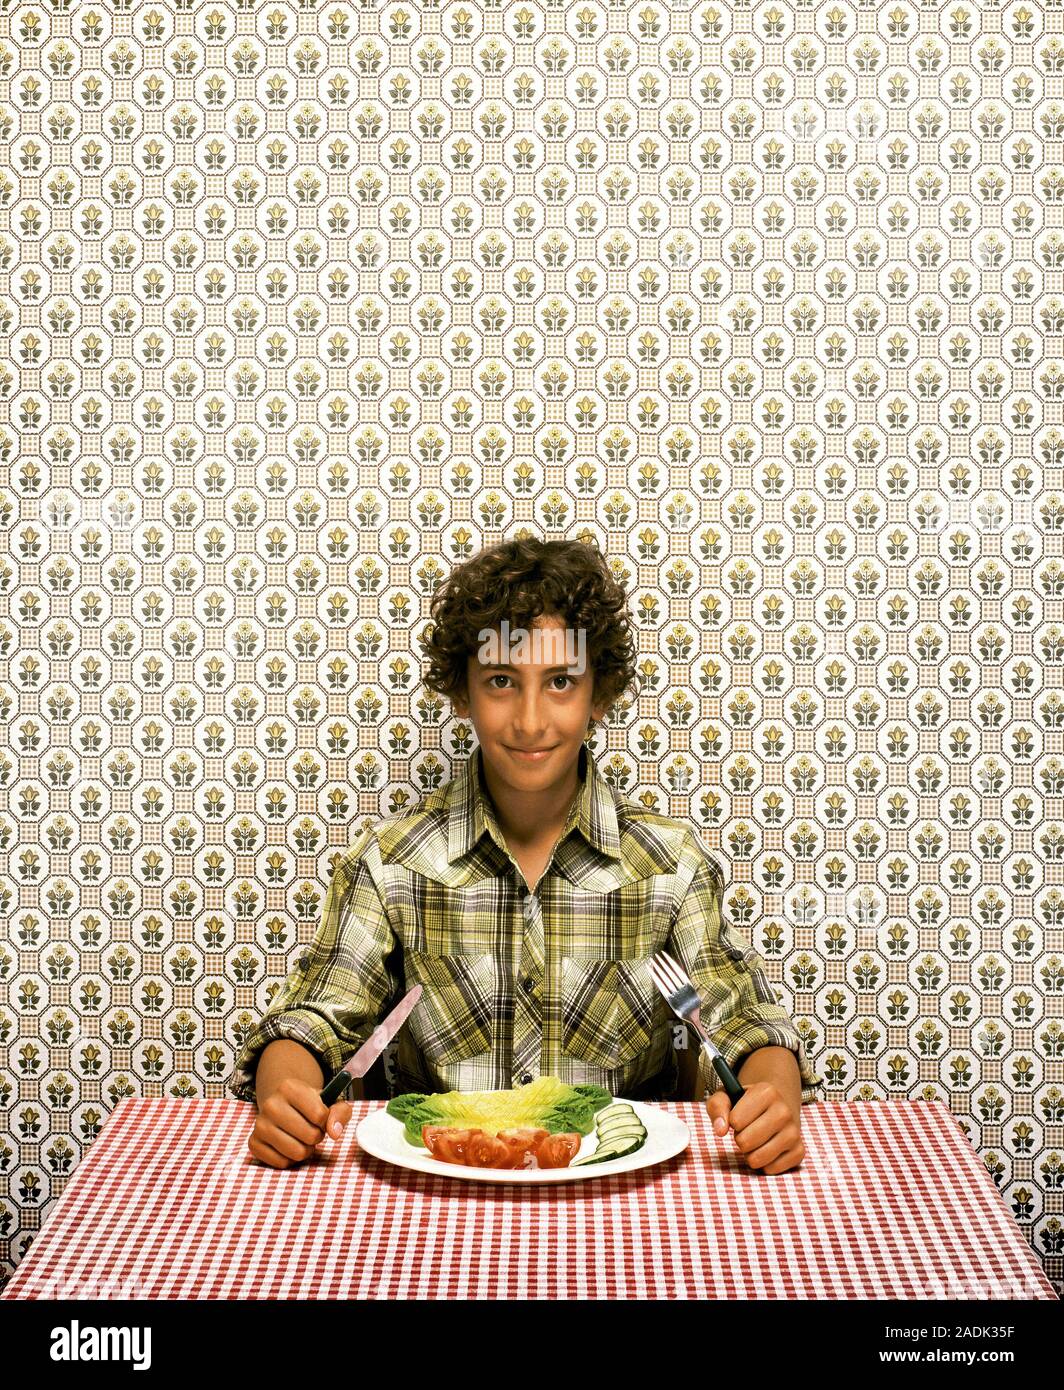 child about to eat at table Stock Photo